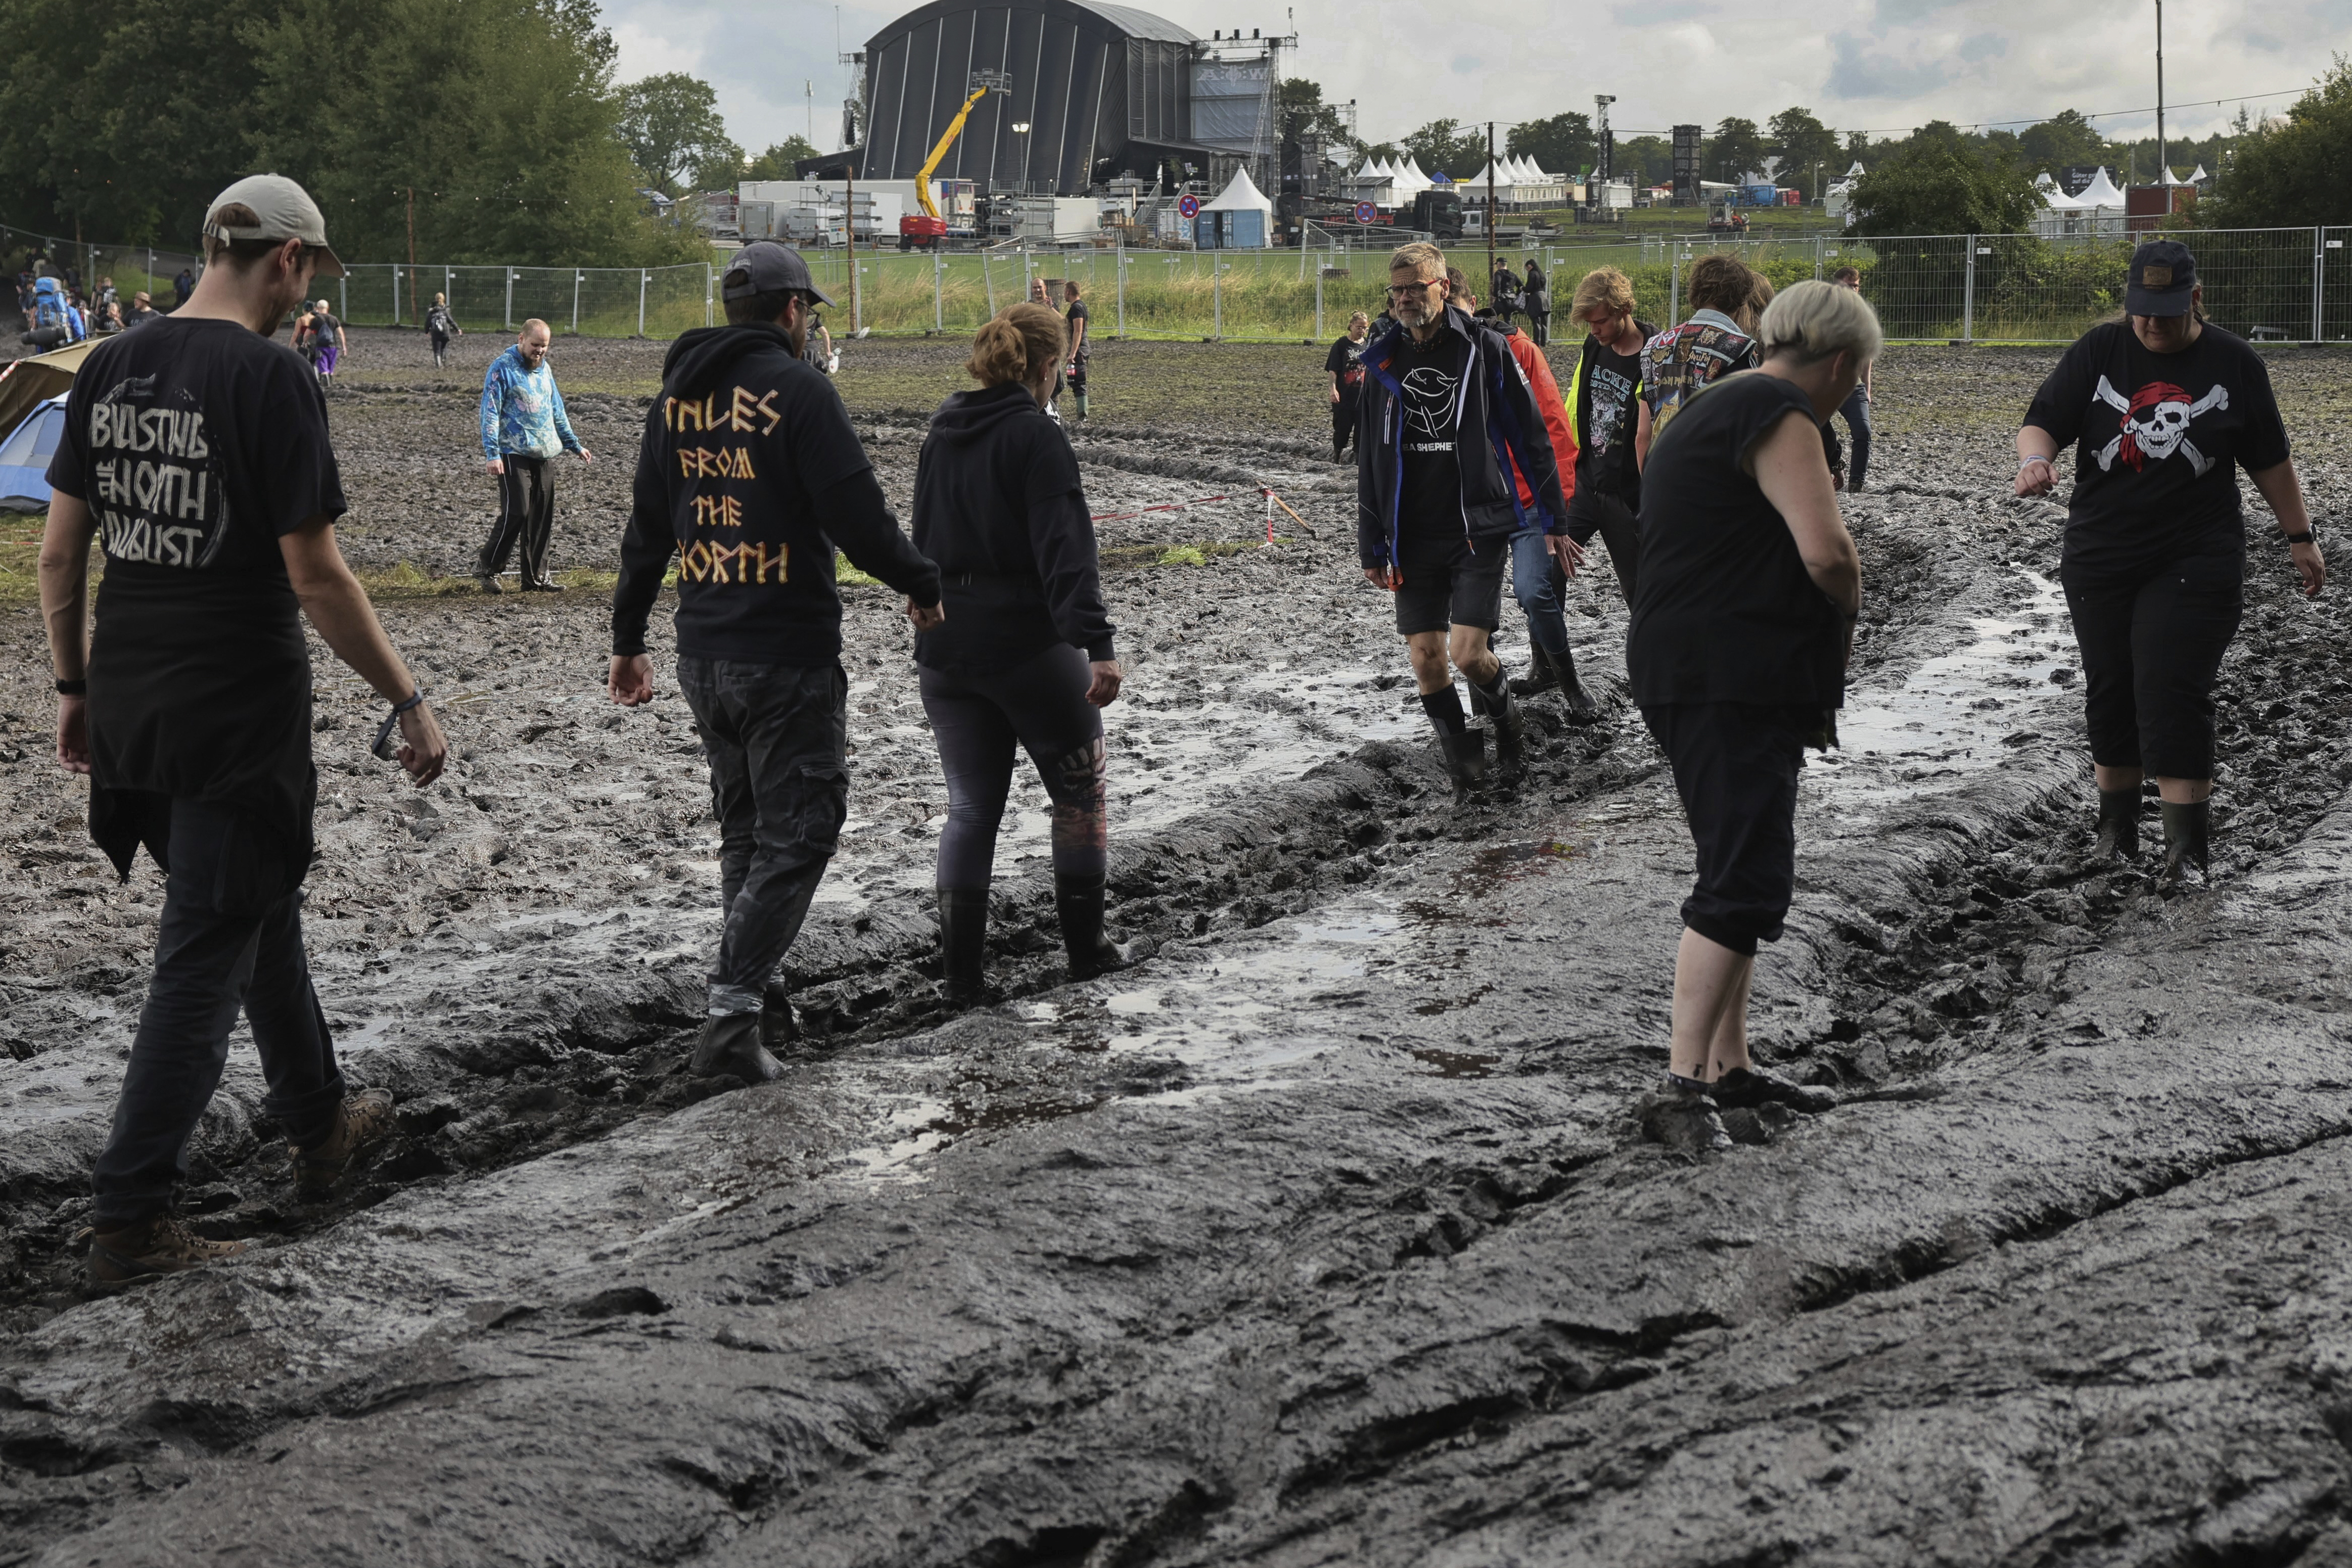 Germany's Wacken metal festival halts admissions after persistent